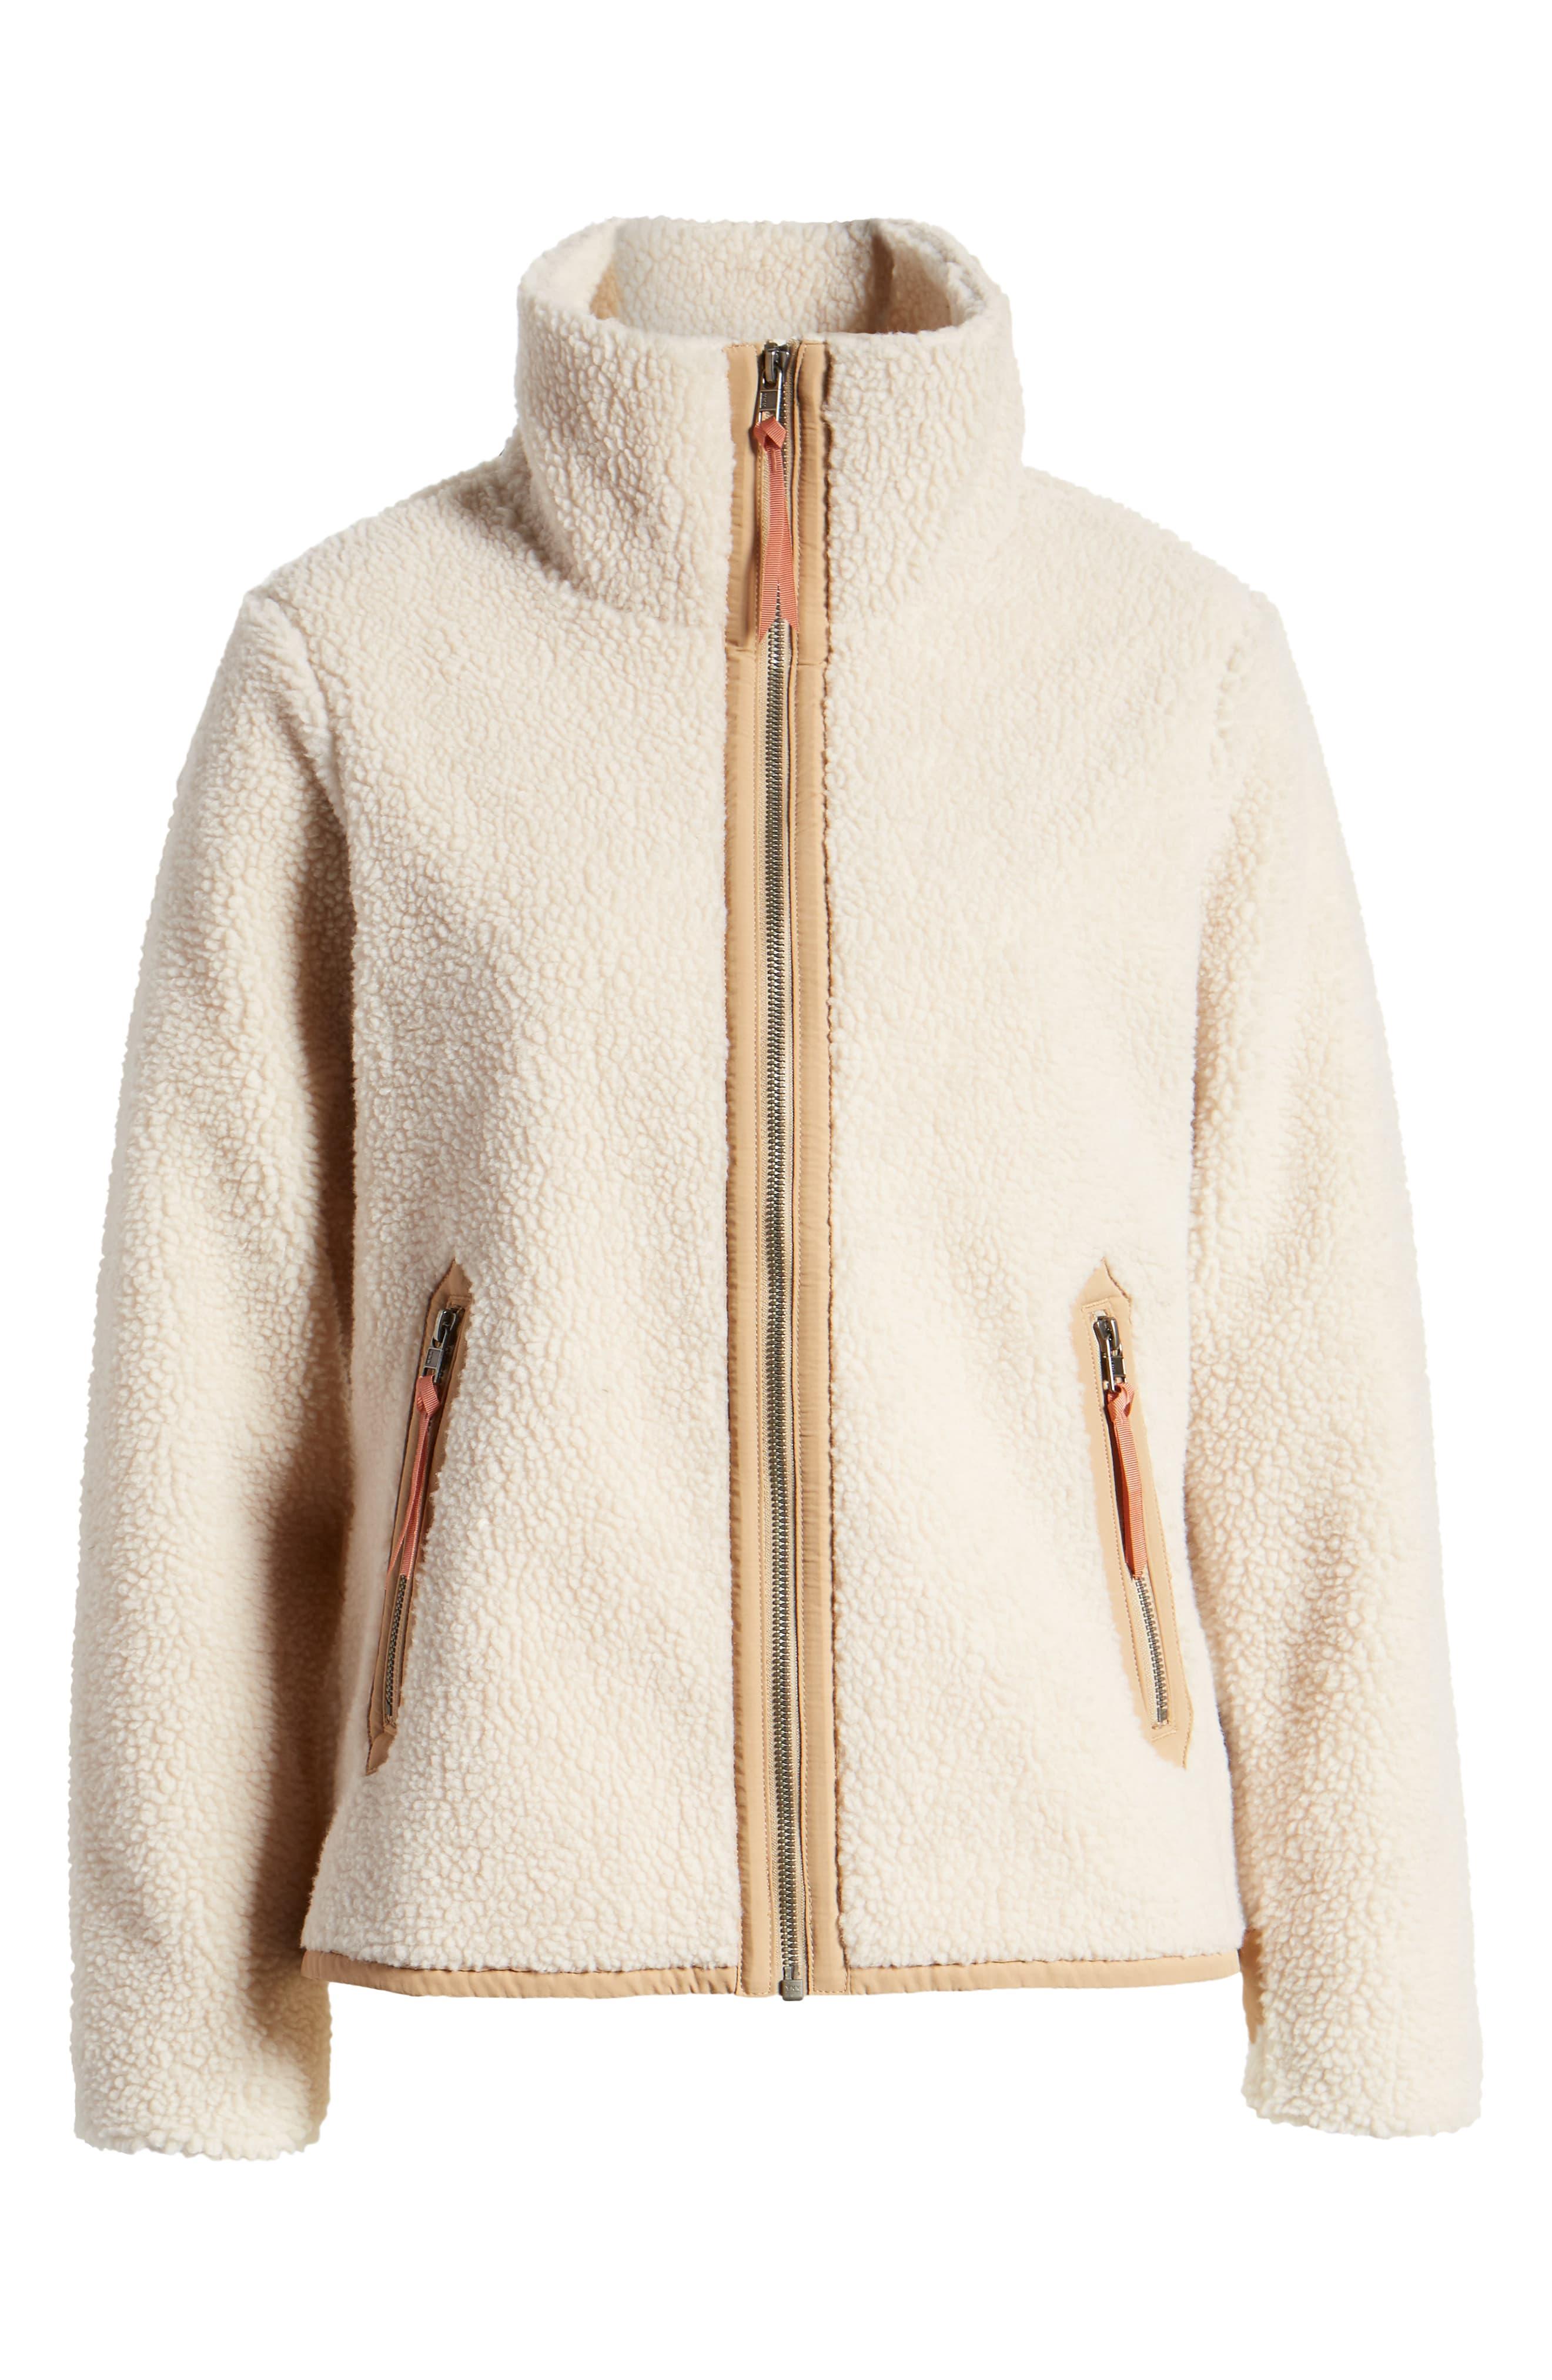 Patagonia Divided Sky High Pile Fleece Jacket in Natural - Lyst